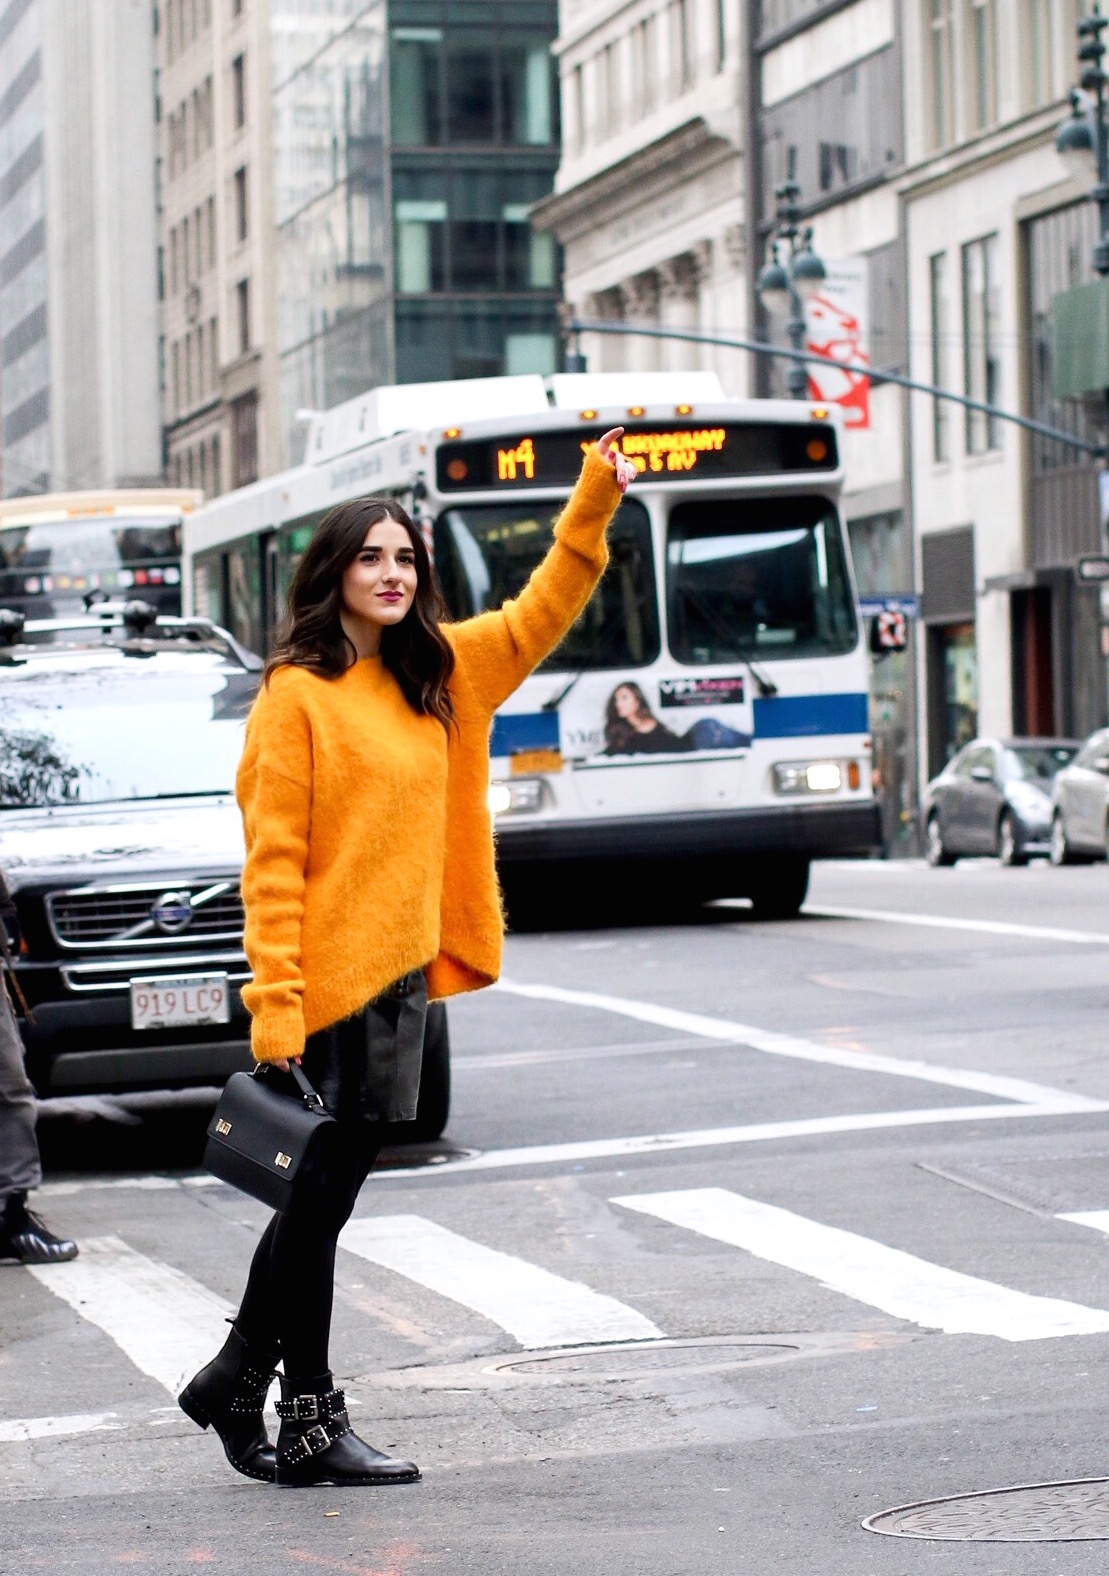 Yellow Sweater Pleather Skirt Why You Should Think Before You Unfollow Esther Santer Fashion Blog NYC Street Style Blogger Outfit OOTD Trendy Cozy Winter Look Girl Women Oversized Top New York City Instagram Tips DSW Studded Boots H&M Topshop  Details.jpg